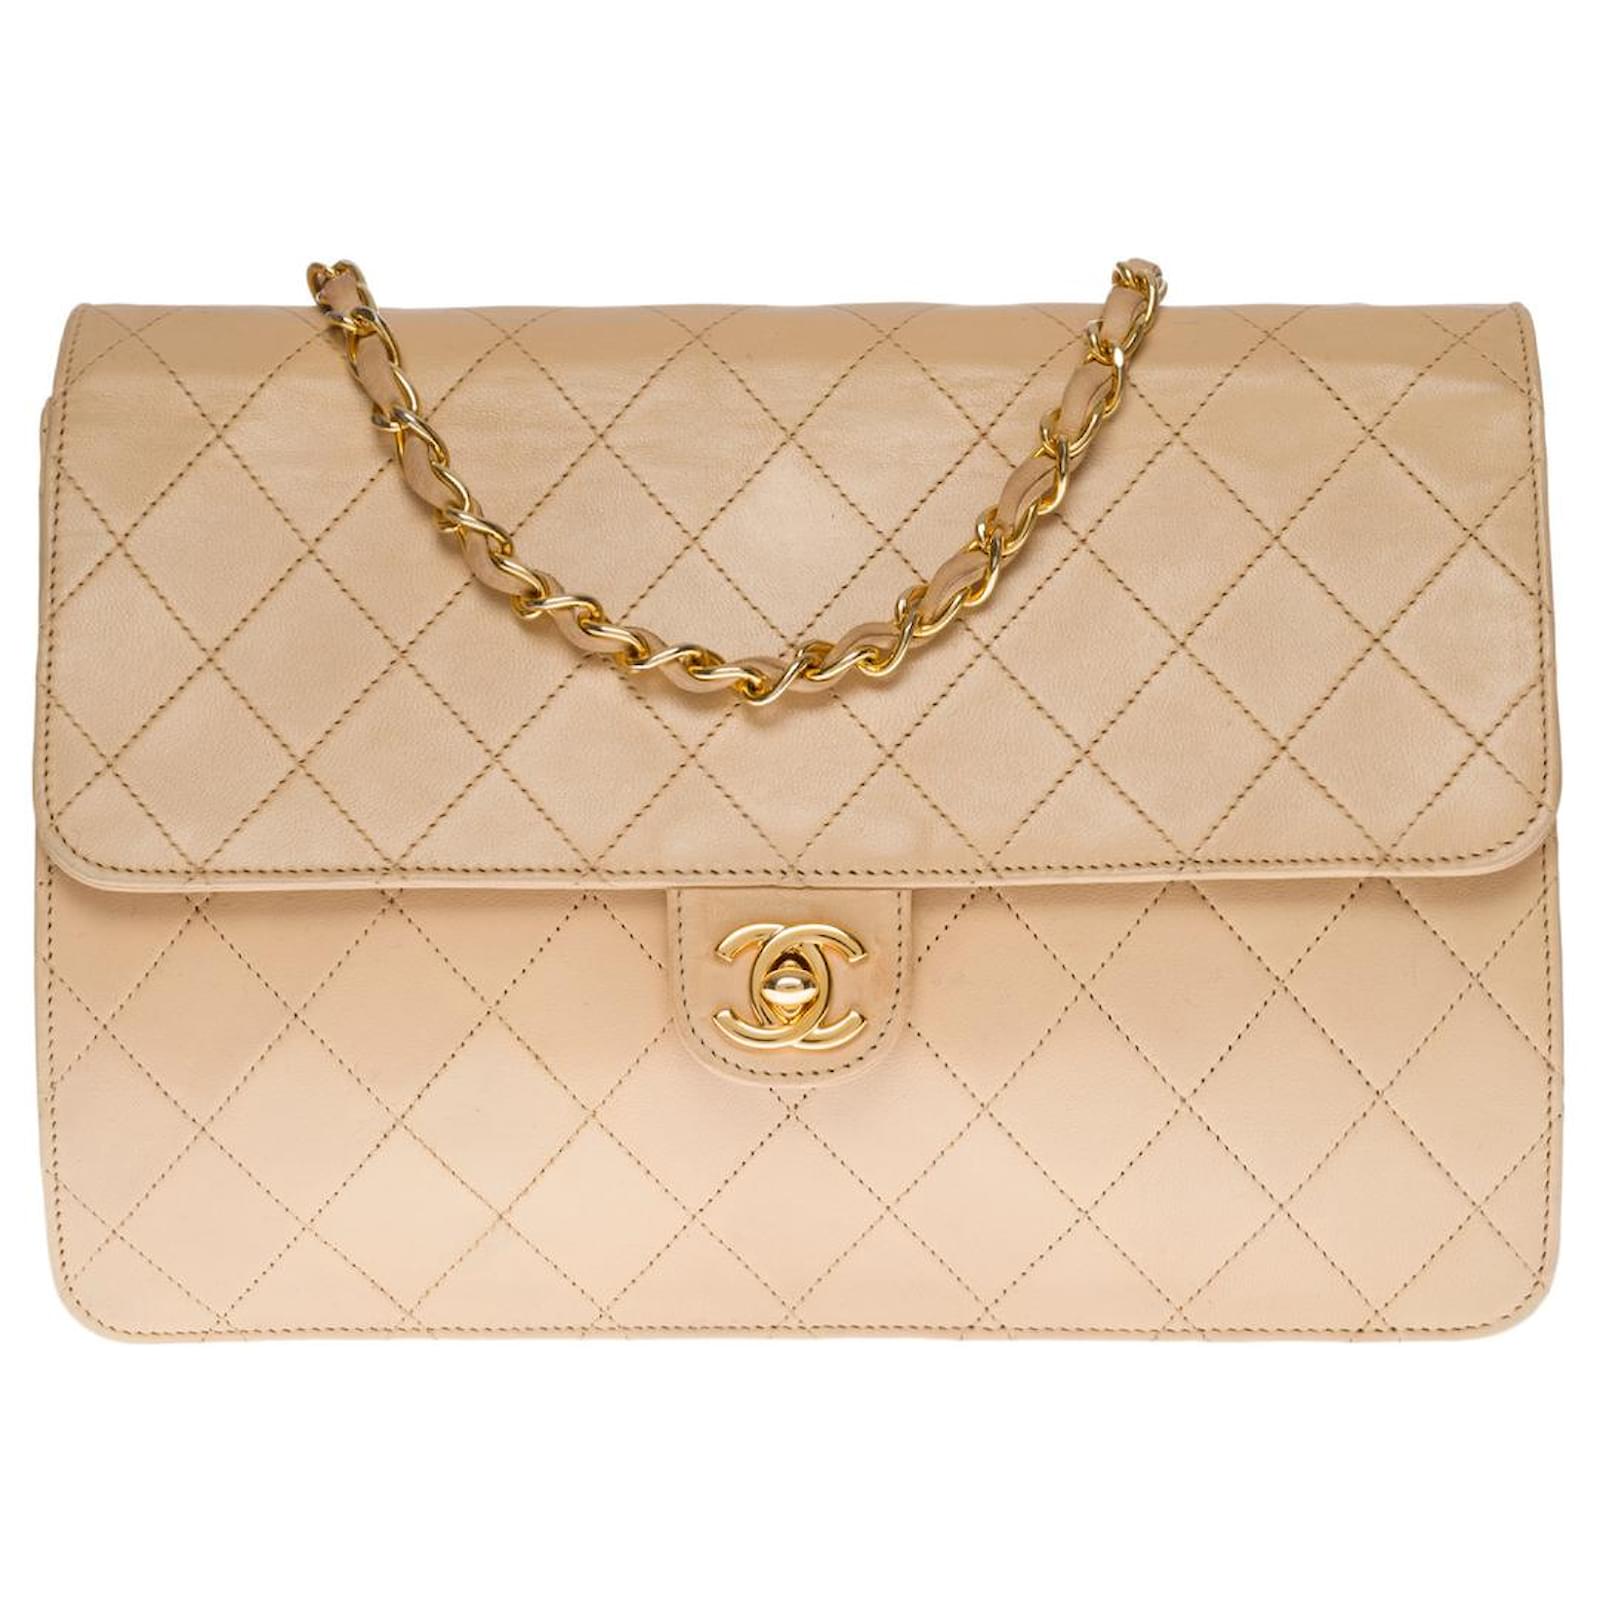 Chanel Timeless/classique Leather Crossbody Bag In Beige